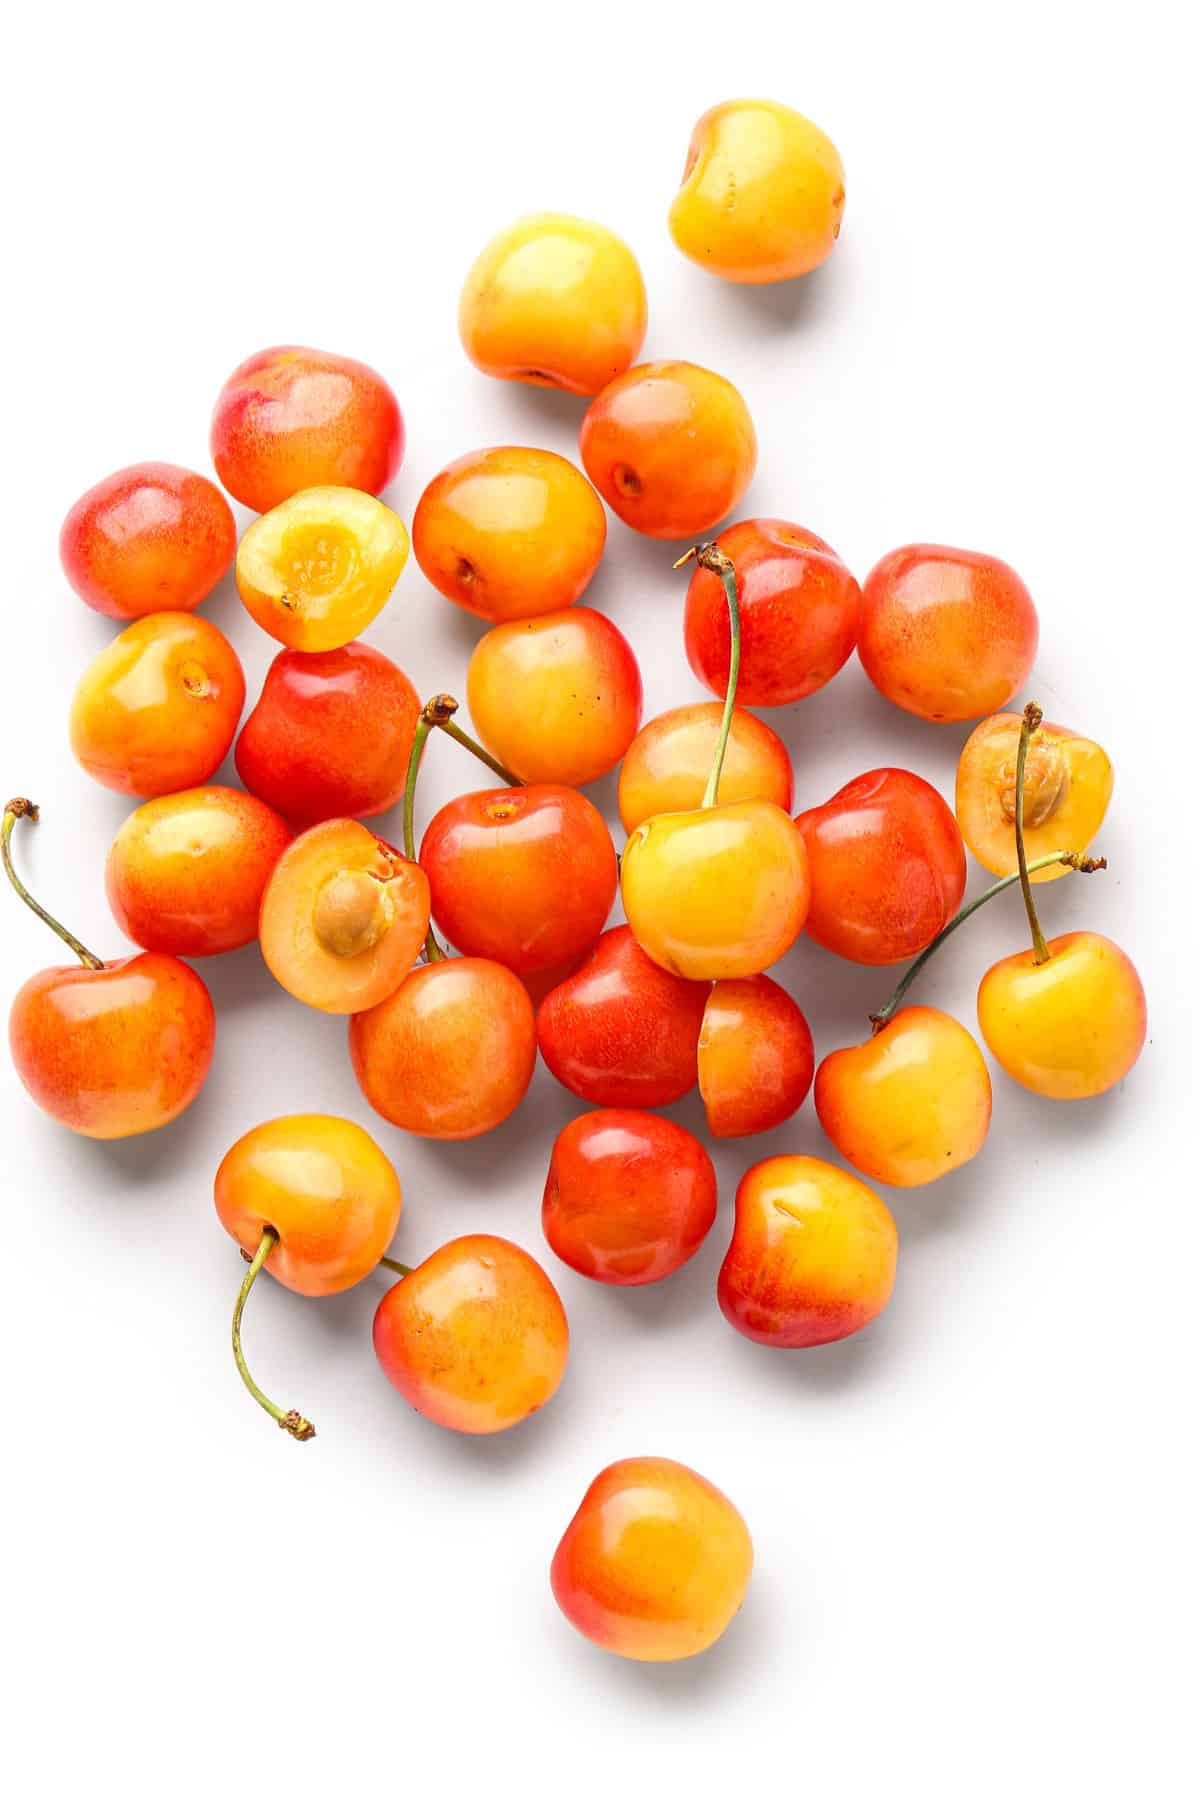 Yellow cherries on a white background